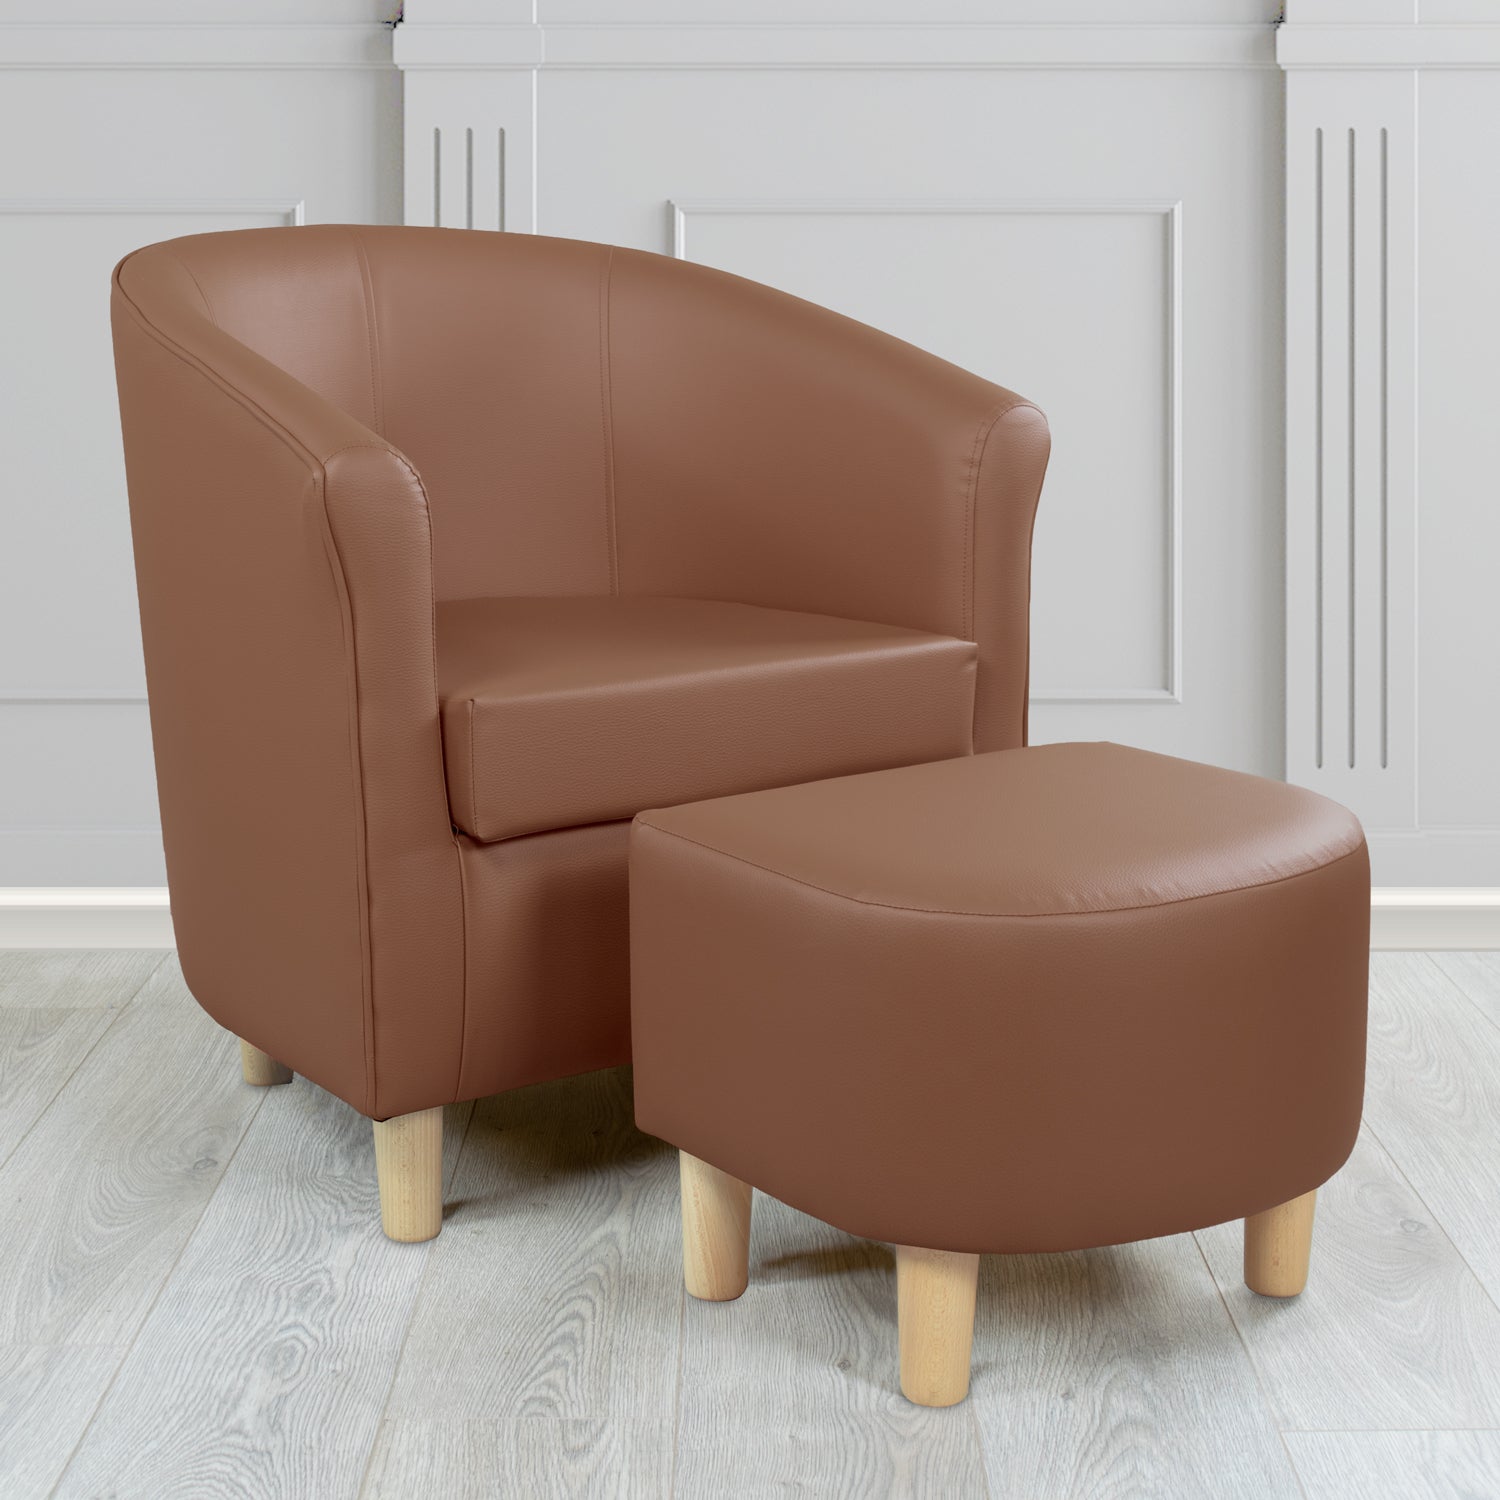 Tuscany Just Colour Walnut Faux Leather Tub Chair with Footstool Set - The Tub Chair Shop